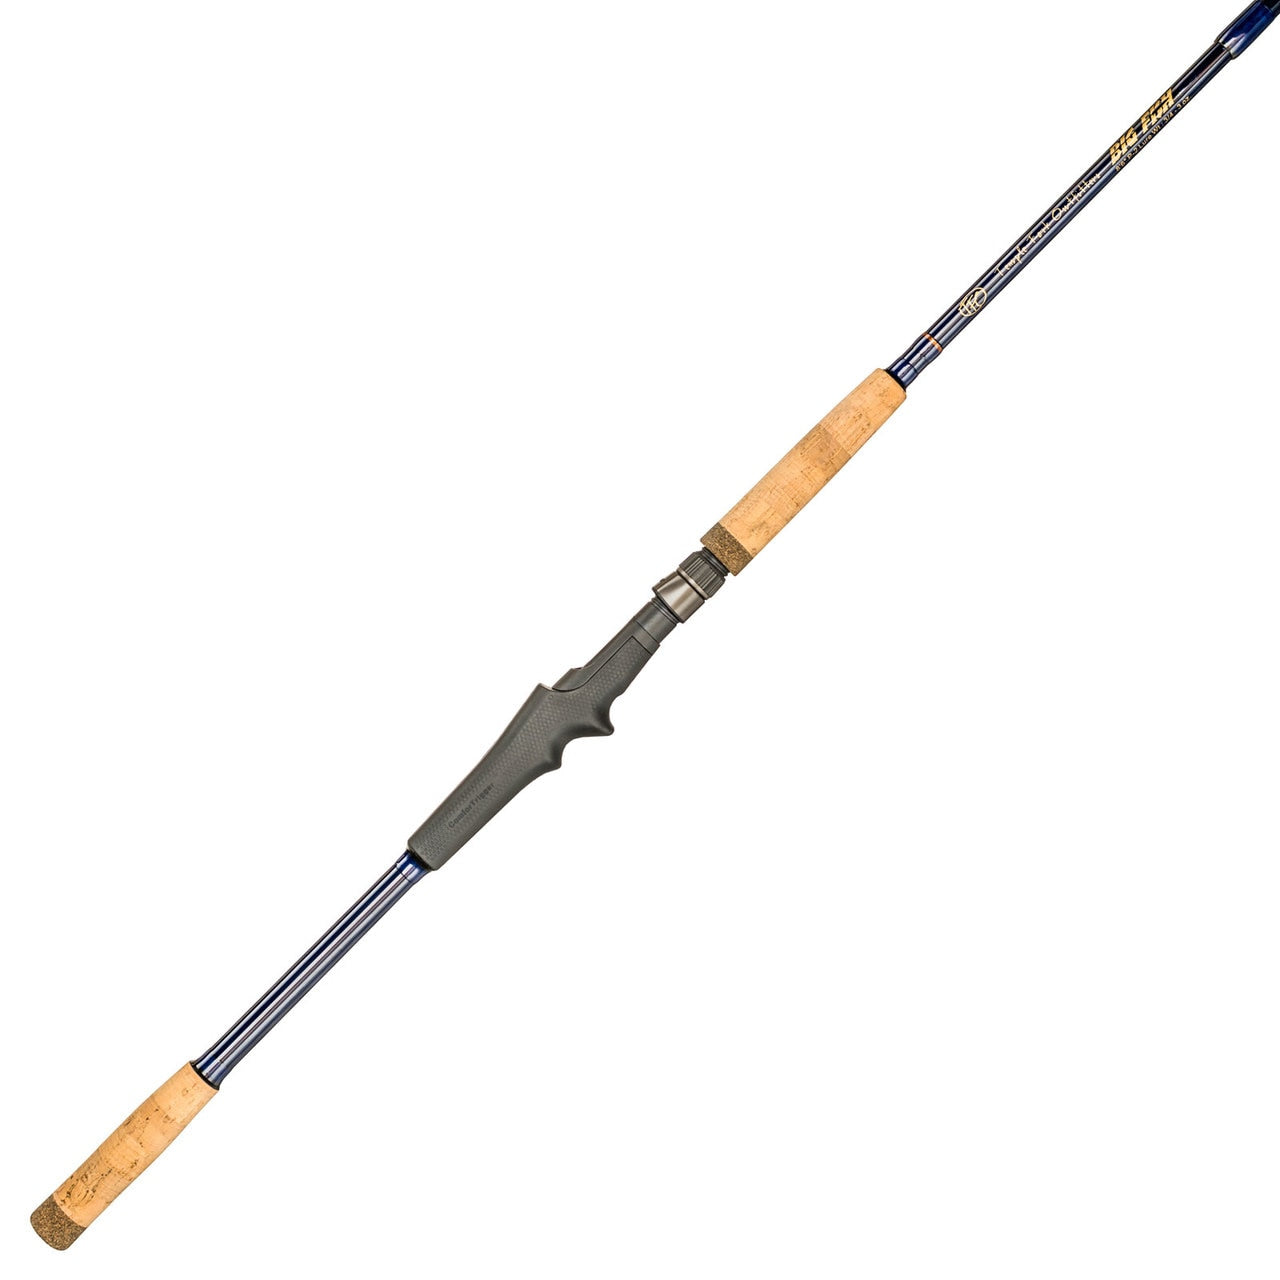 Temple Fork Outfitters Tfd Big Fish Casting Rod Tfd BFC 701-1